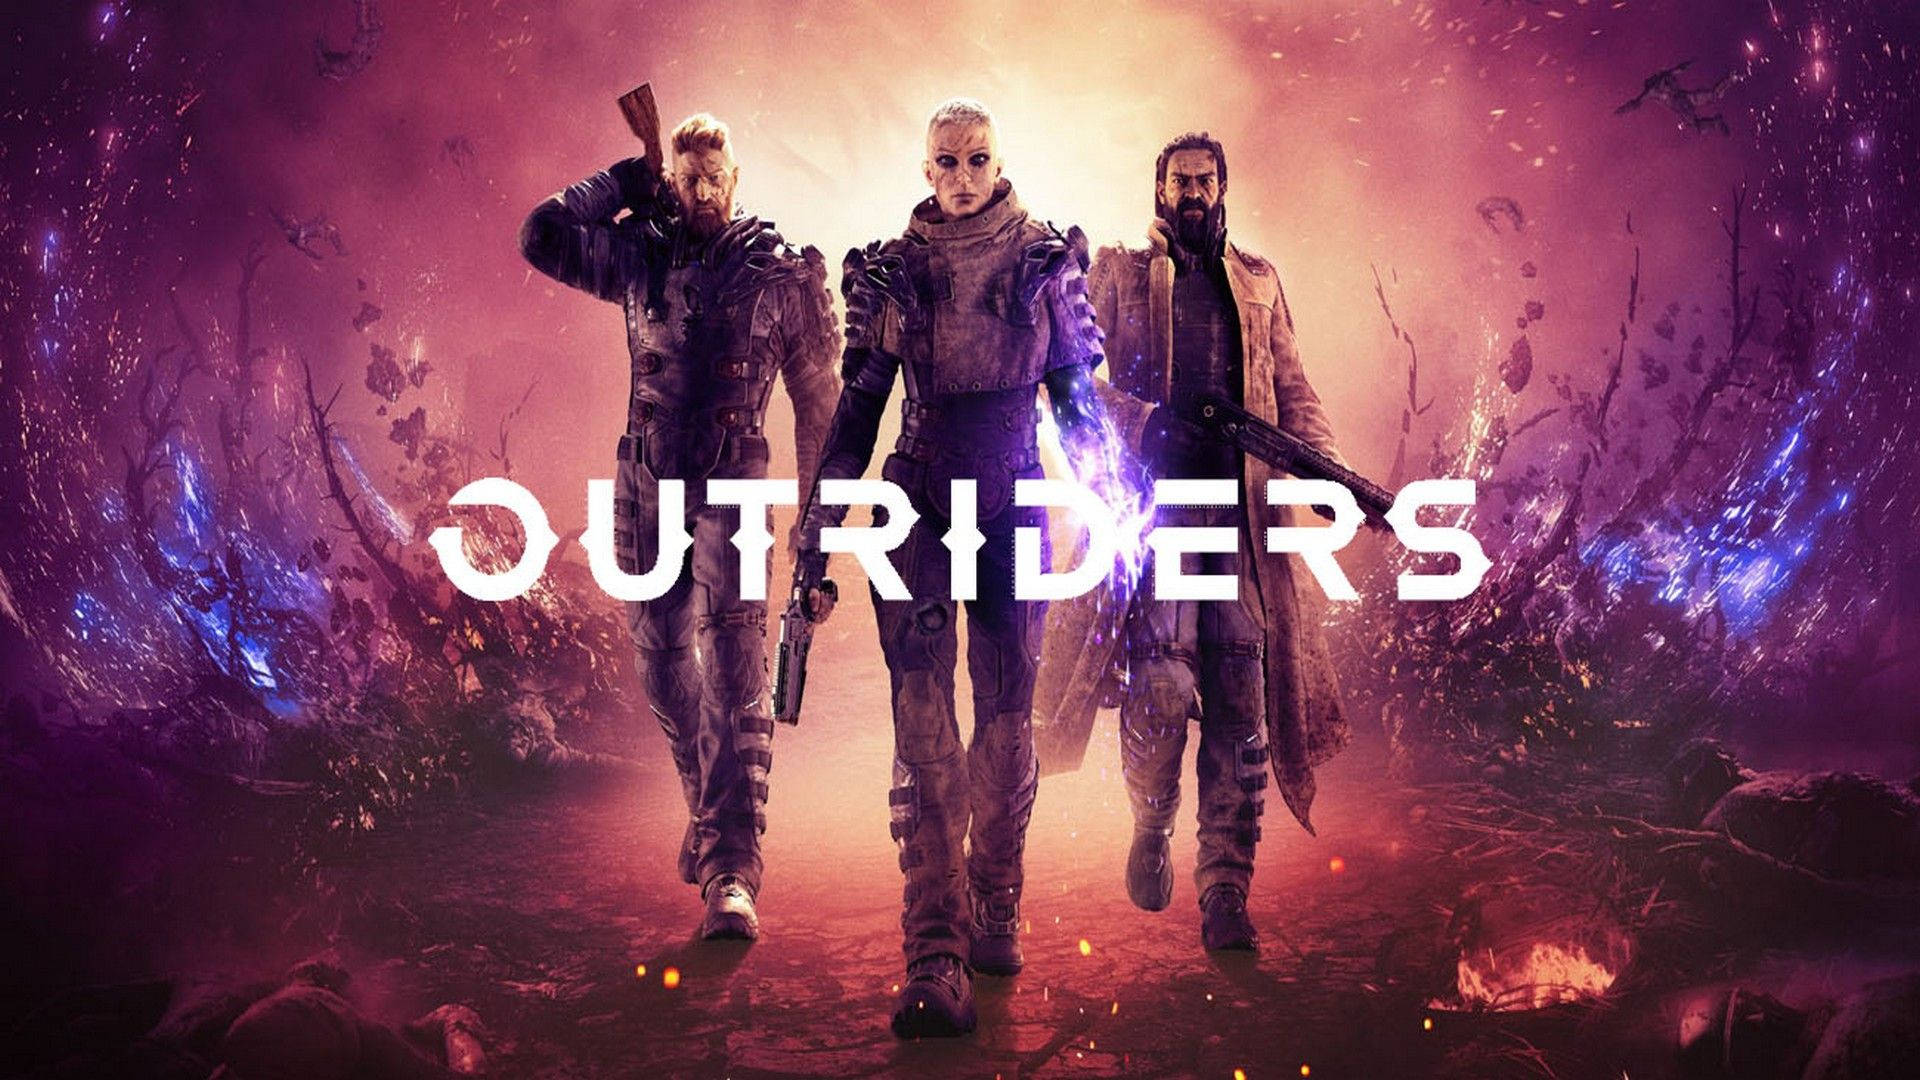 Outriders Wallpaper